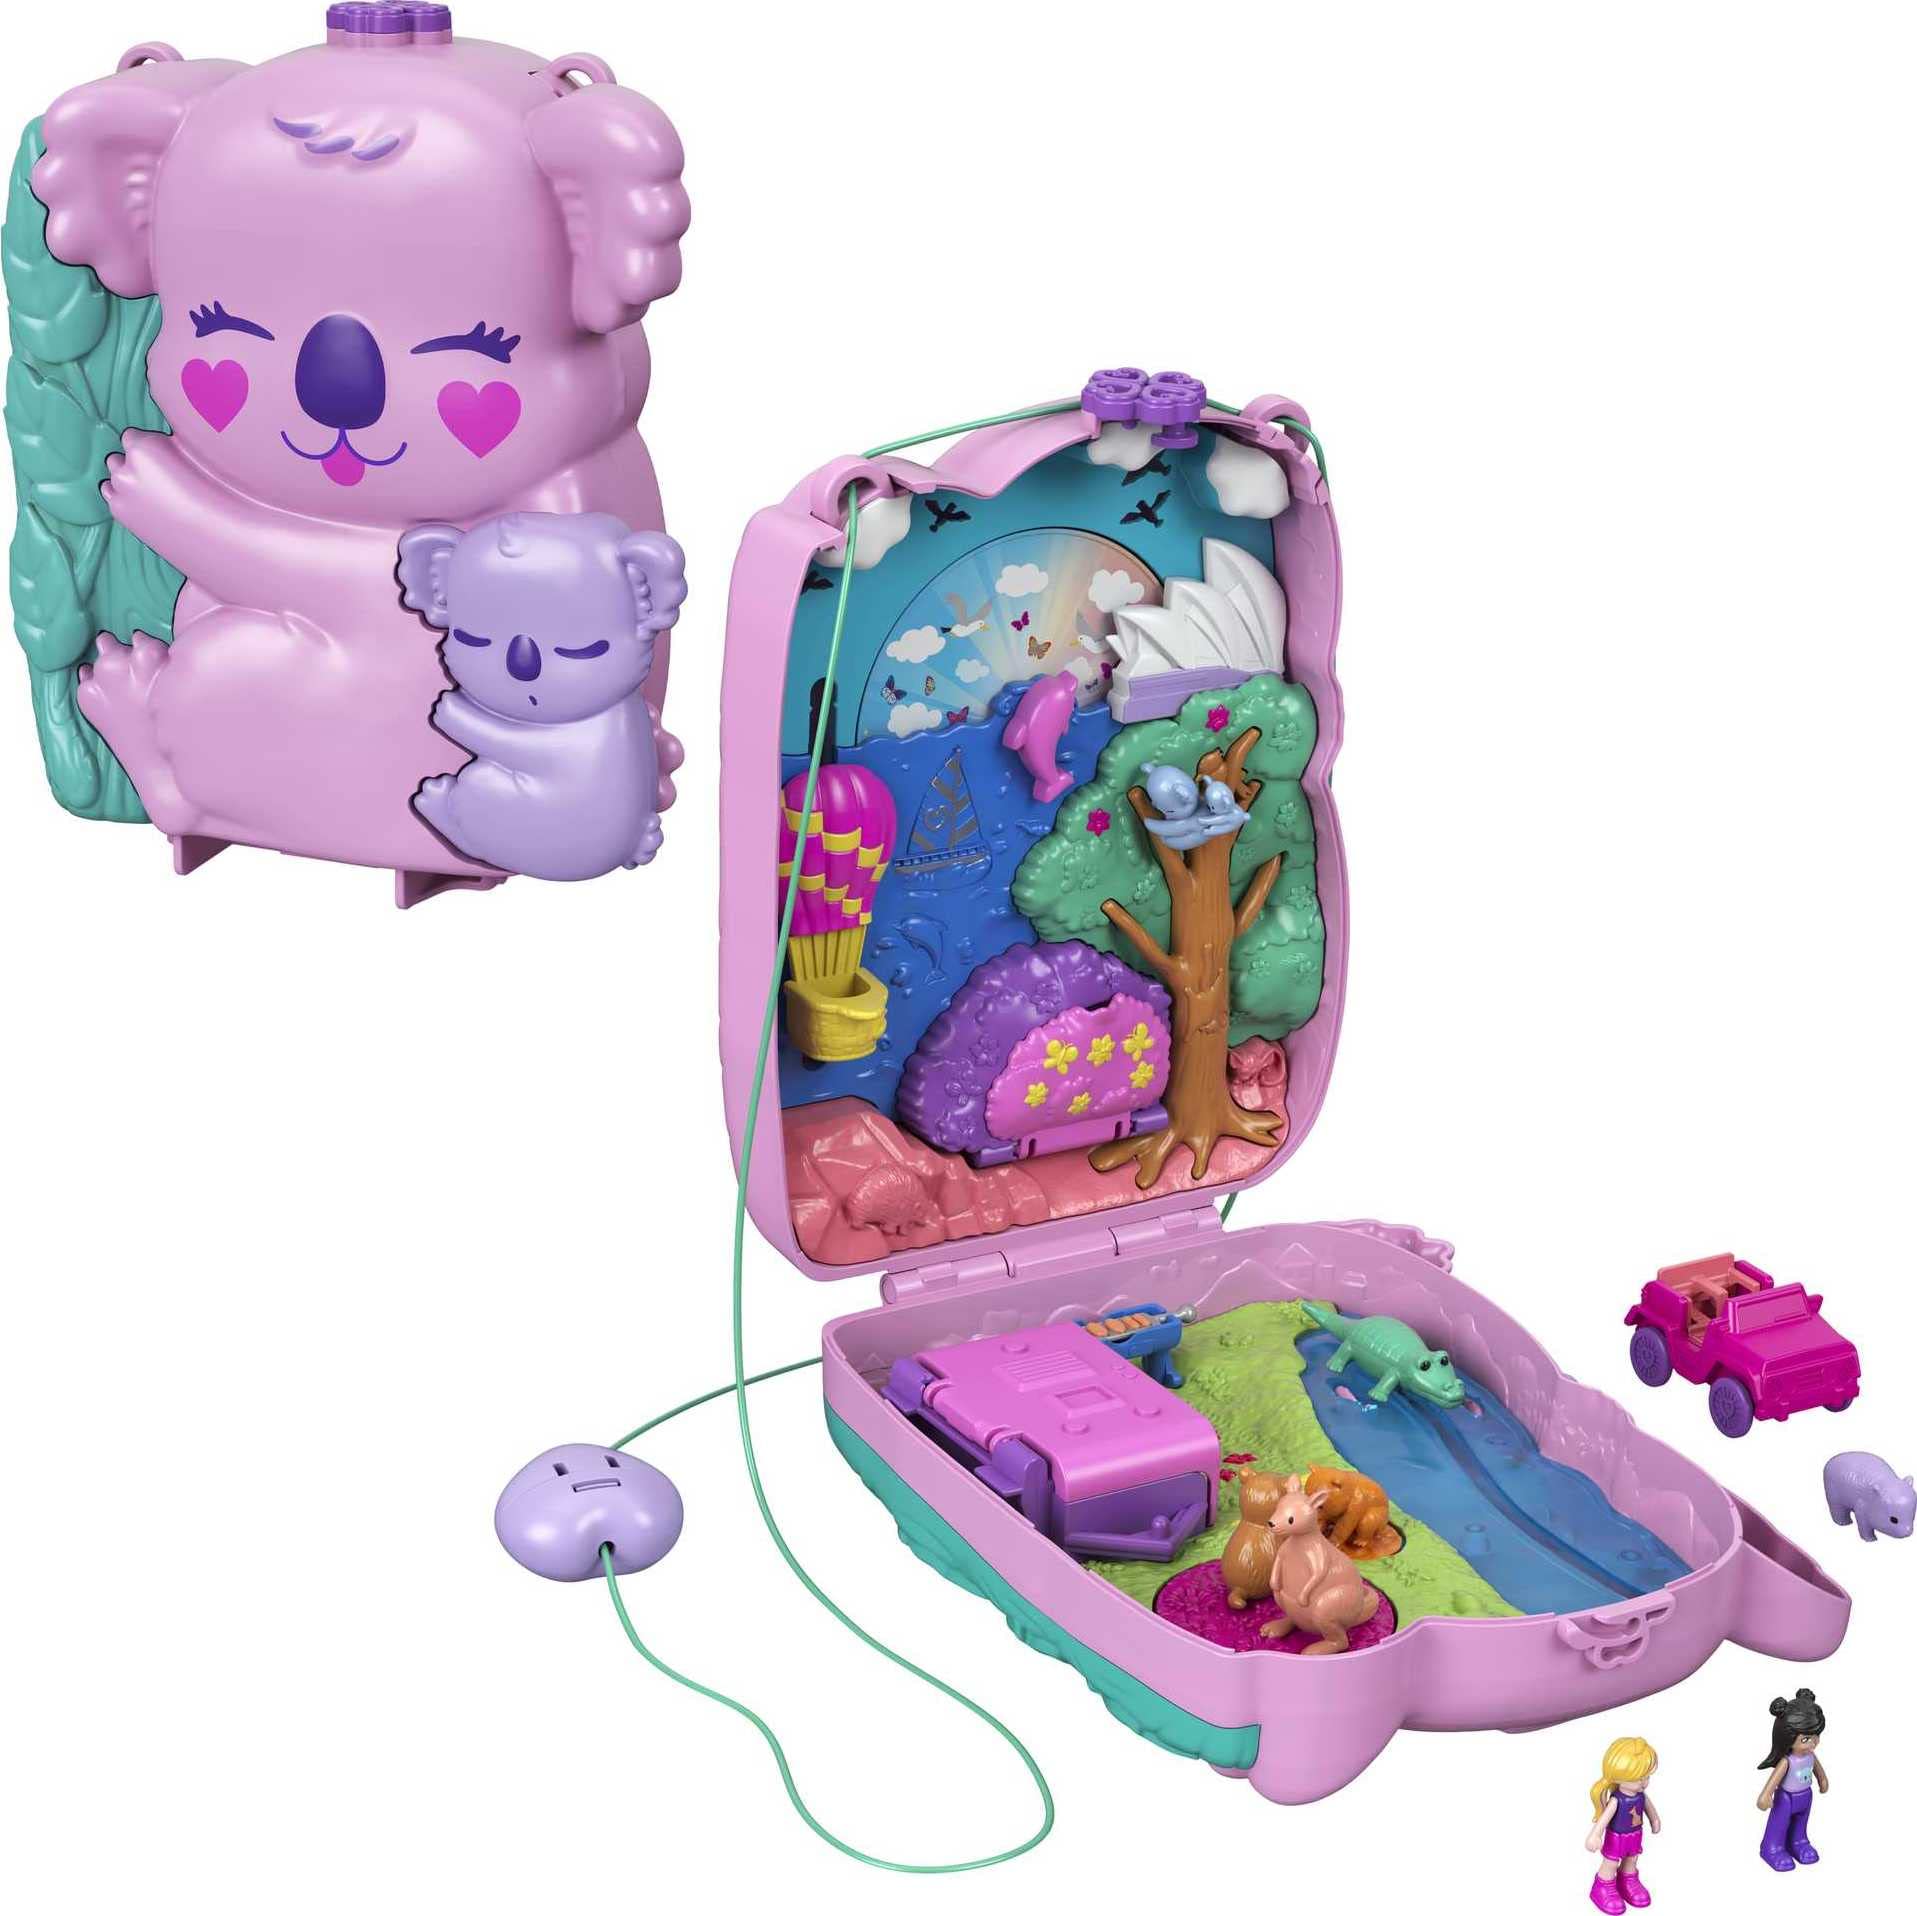 Polly Pocket Dolls & Accessories, 2-In-1 Travel Toy, Koala Purse Playset with 2 Micro Dolls, 1 Toy Car and 5 Animals $8.99